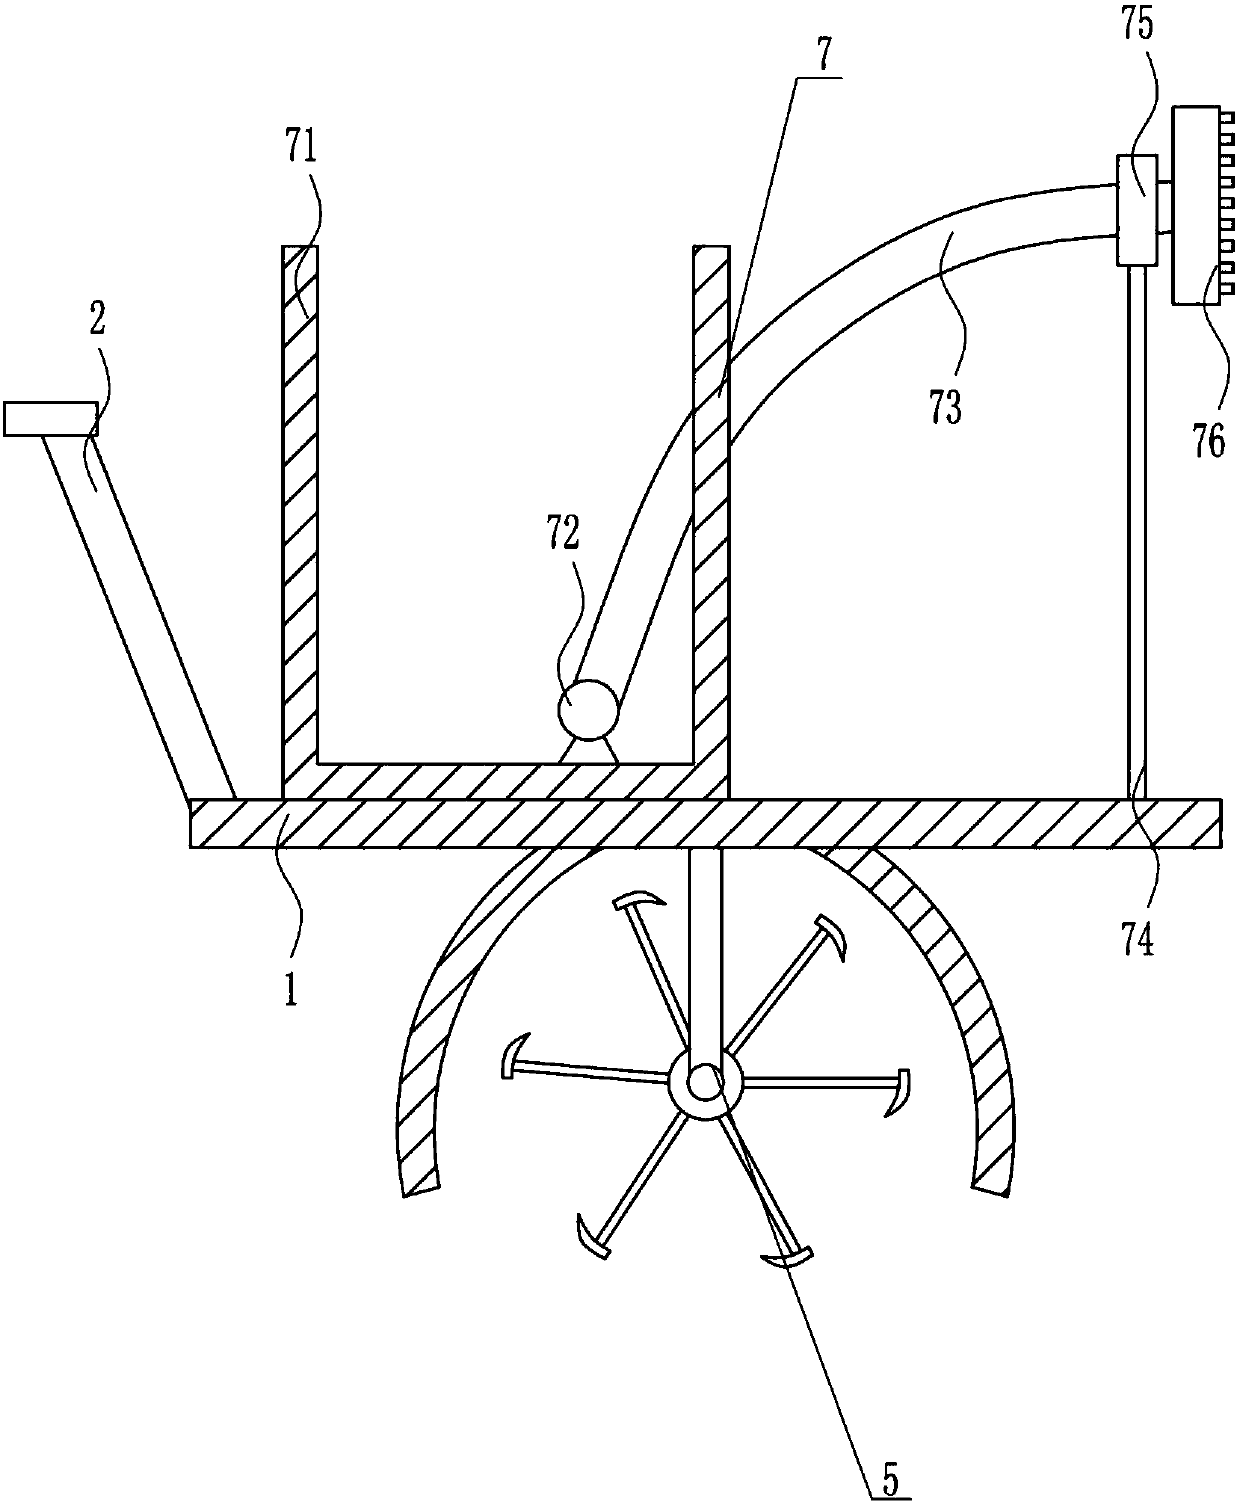 Efficient soil loosening device for agricultural planting